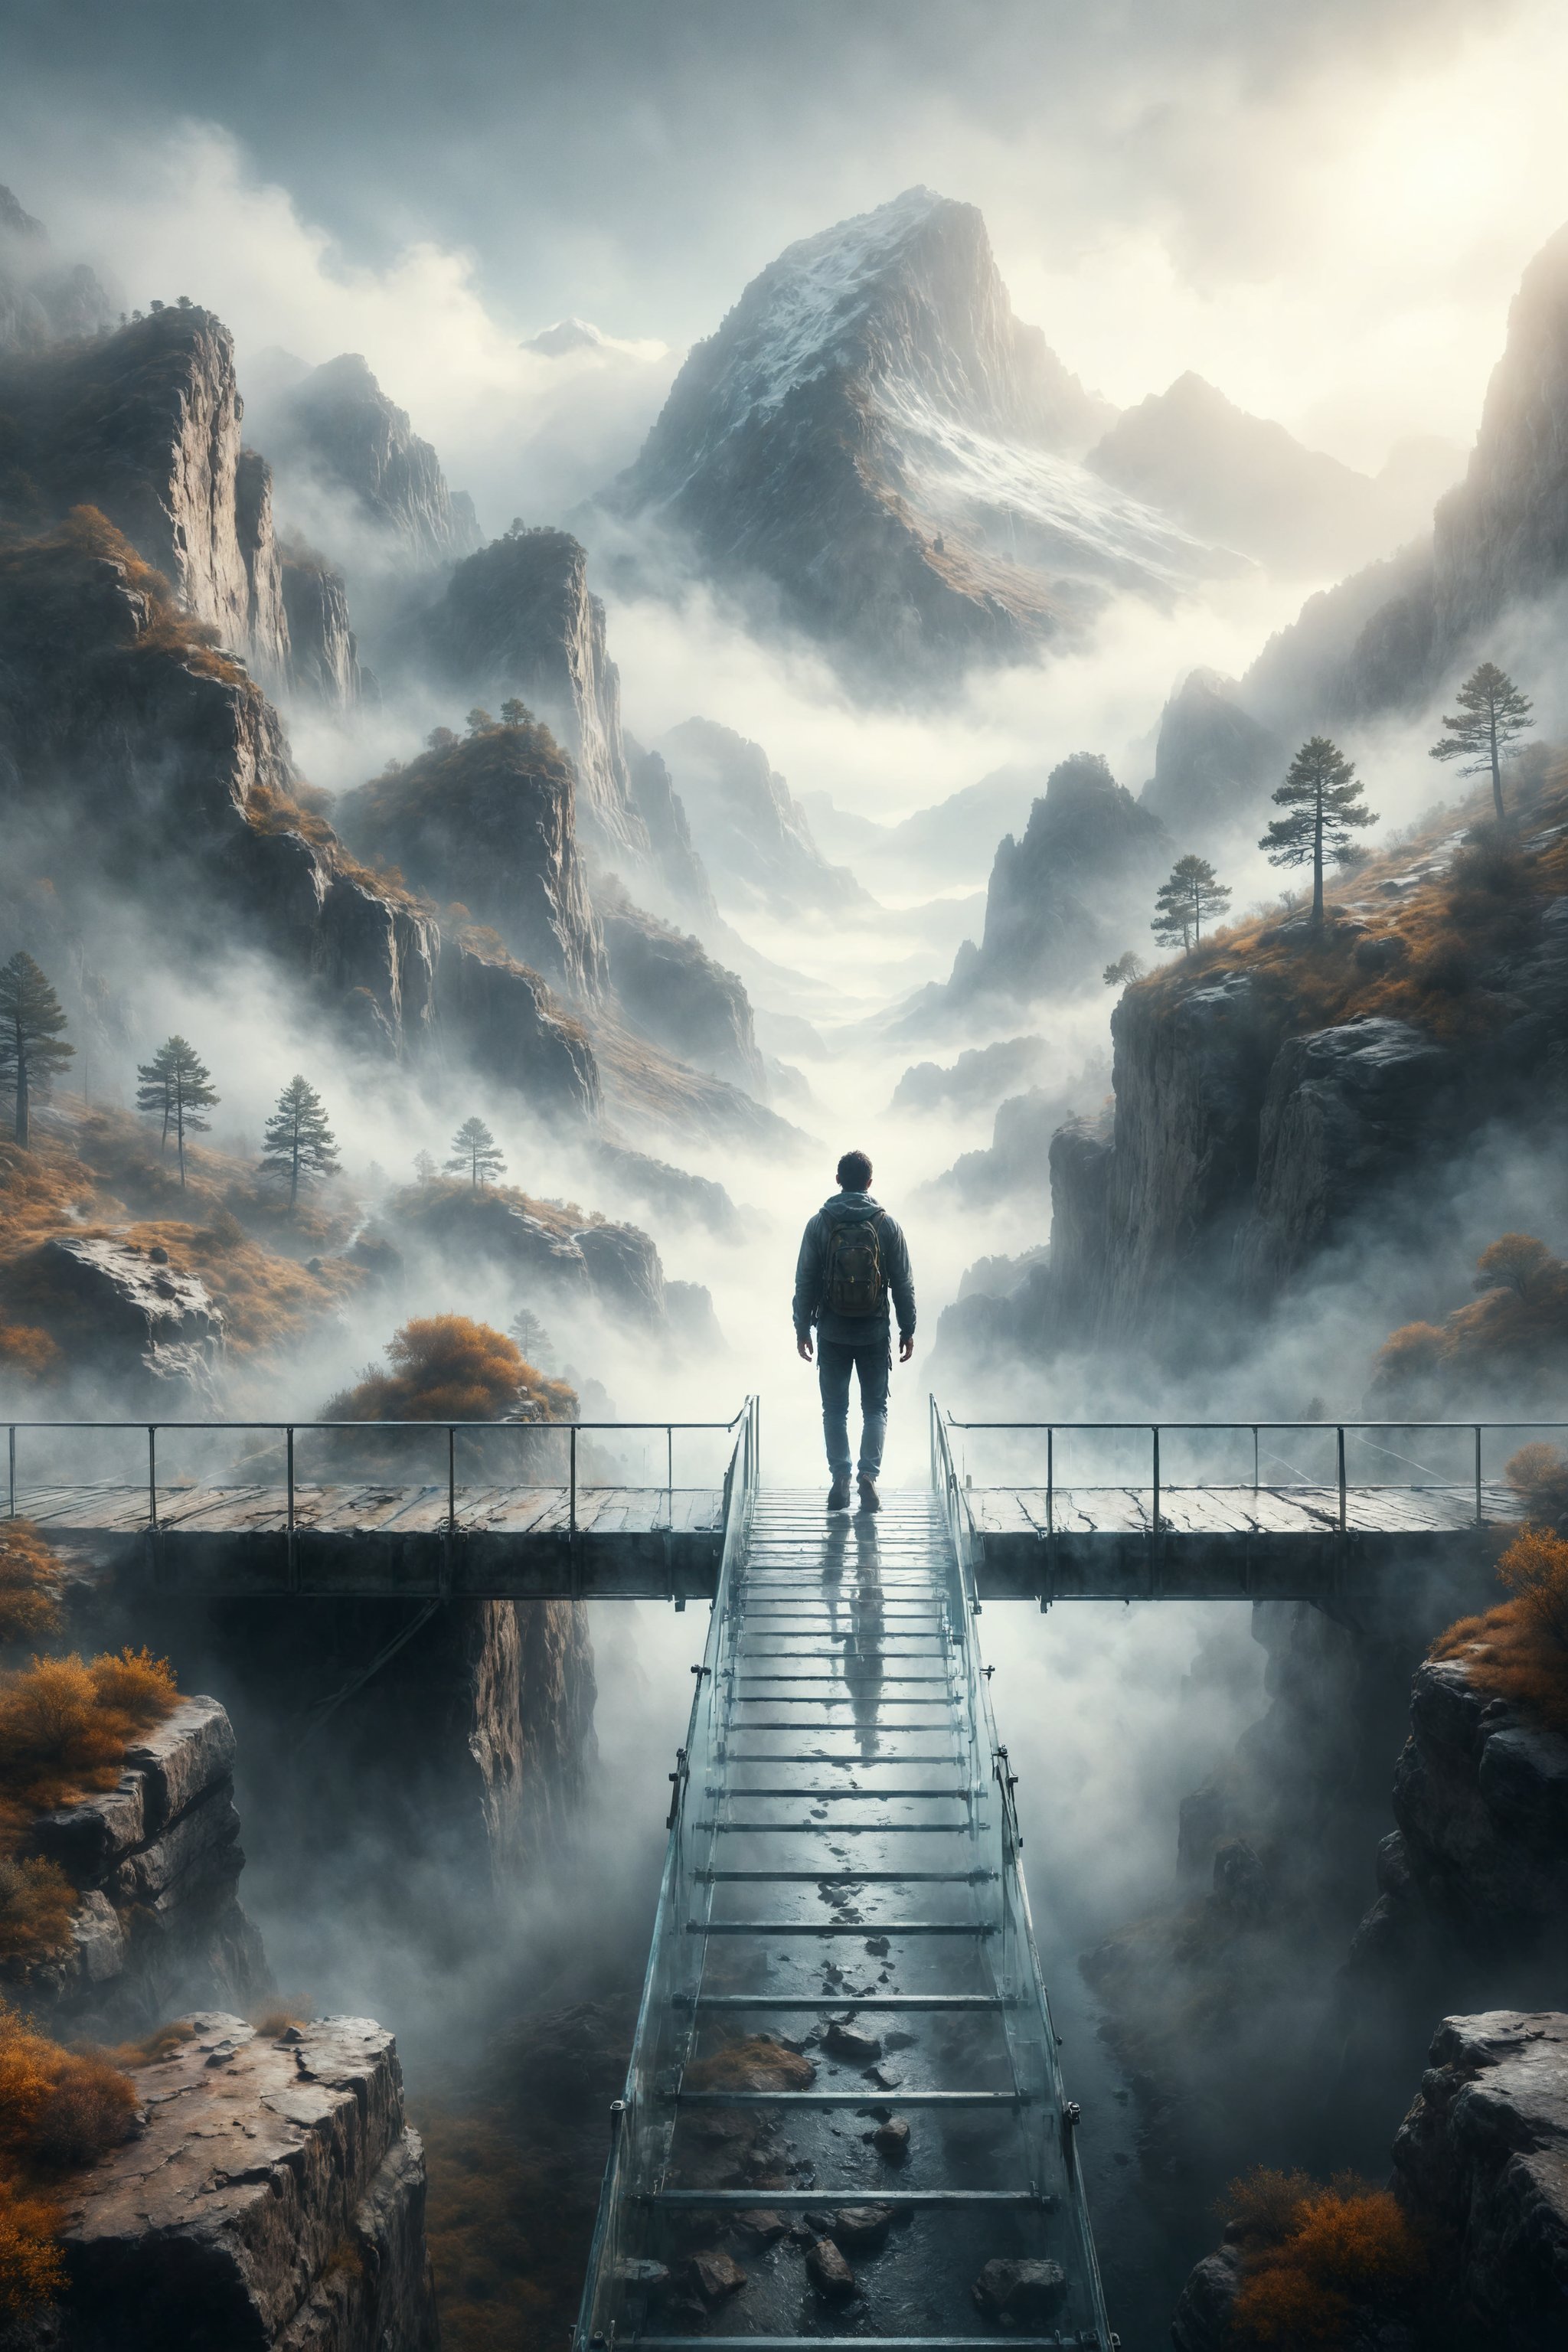 Create an illustration of a person walking on a glass bridge over a fog-filled canyon, with mountains in the distance.